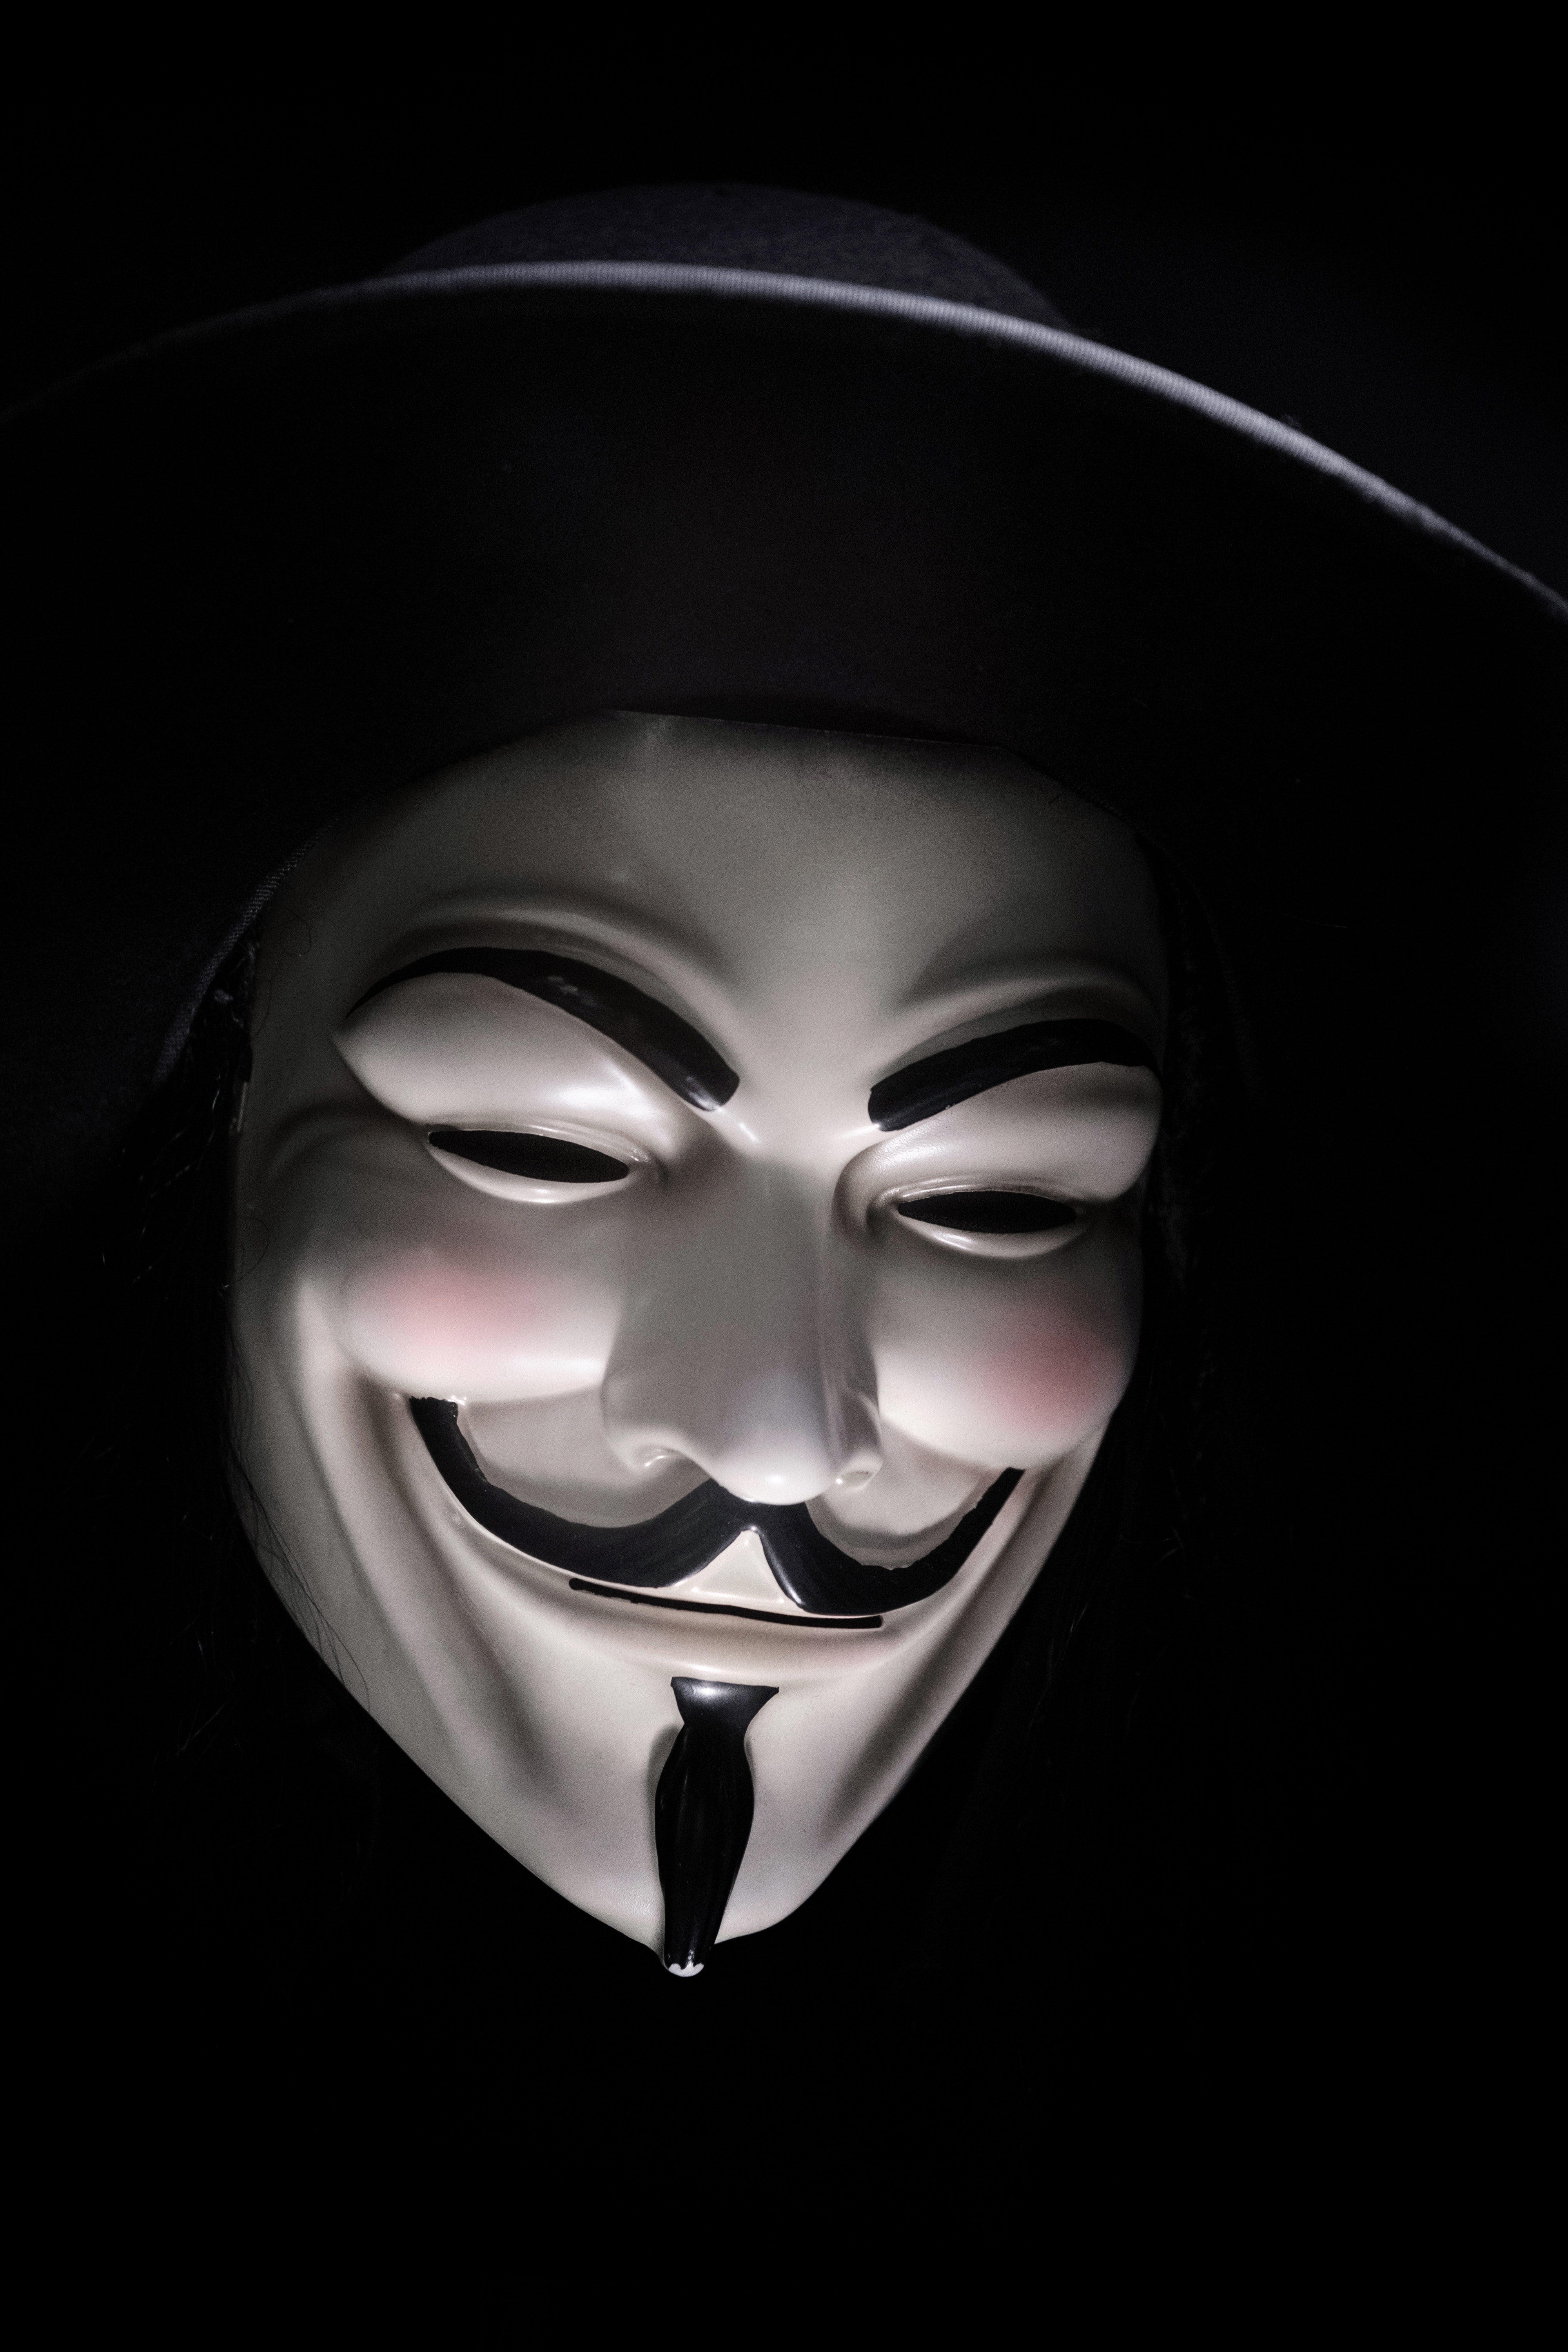 113357 download wallpaper anonymous, dark, miscellanea, miscellaneous, mask, hat screensavers and pictures for free